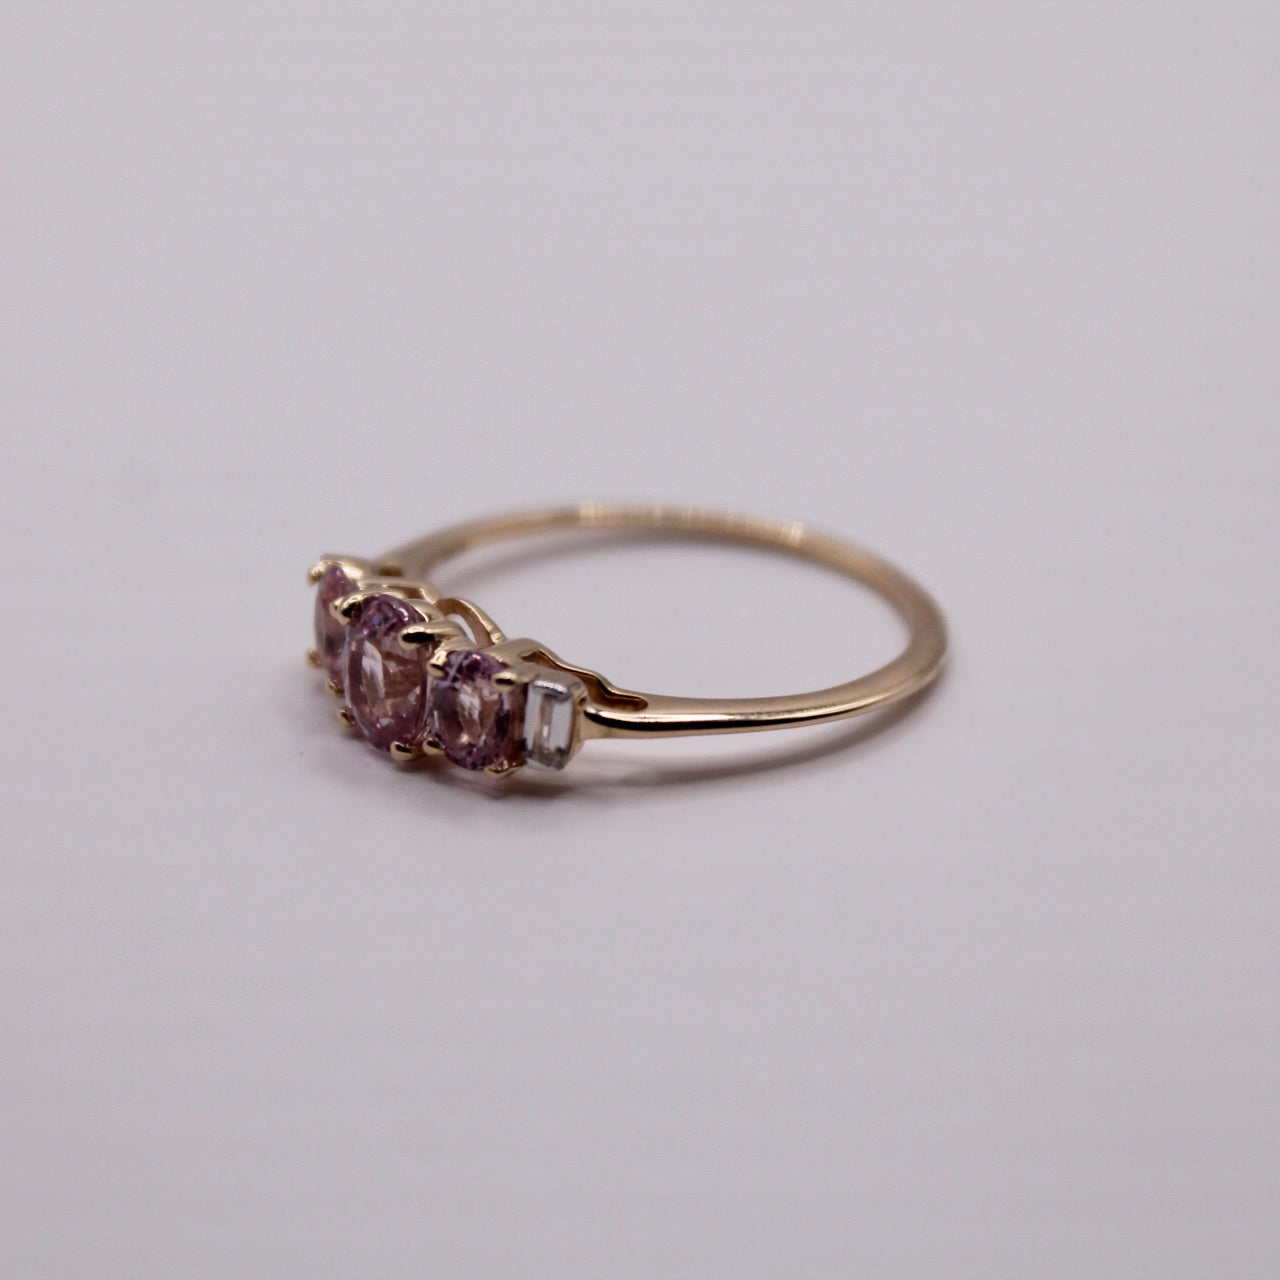 Pink Sapphire Trilogy Ring